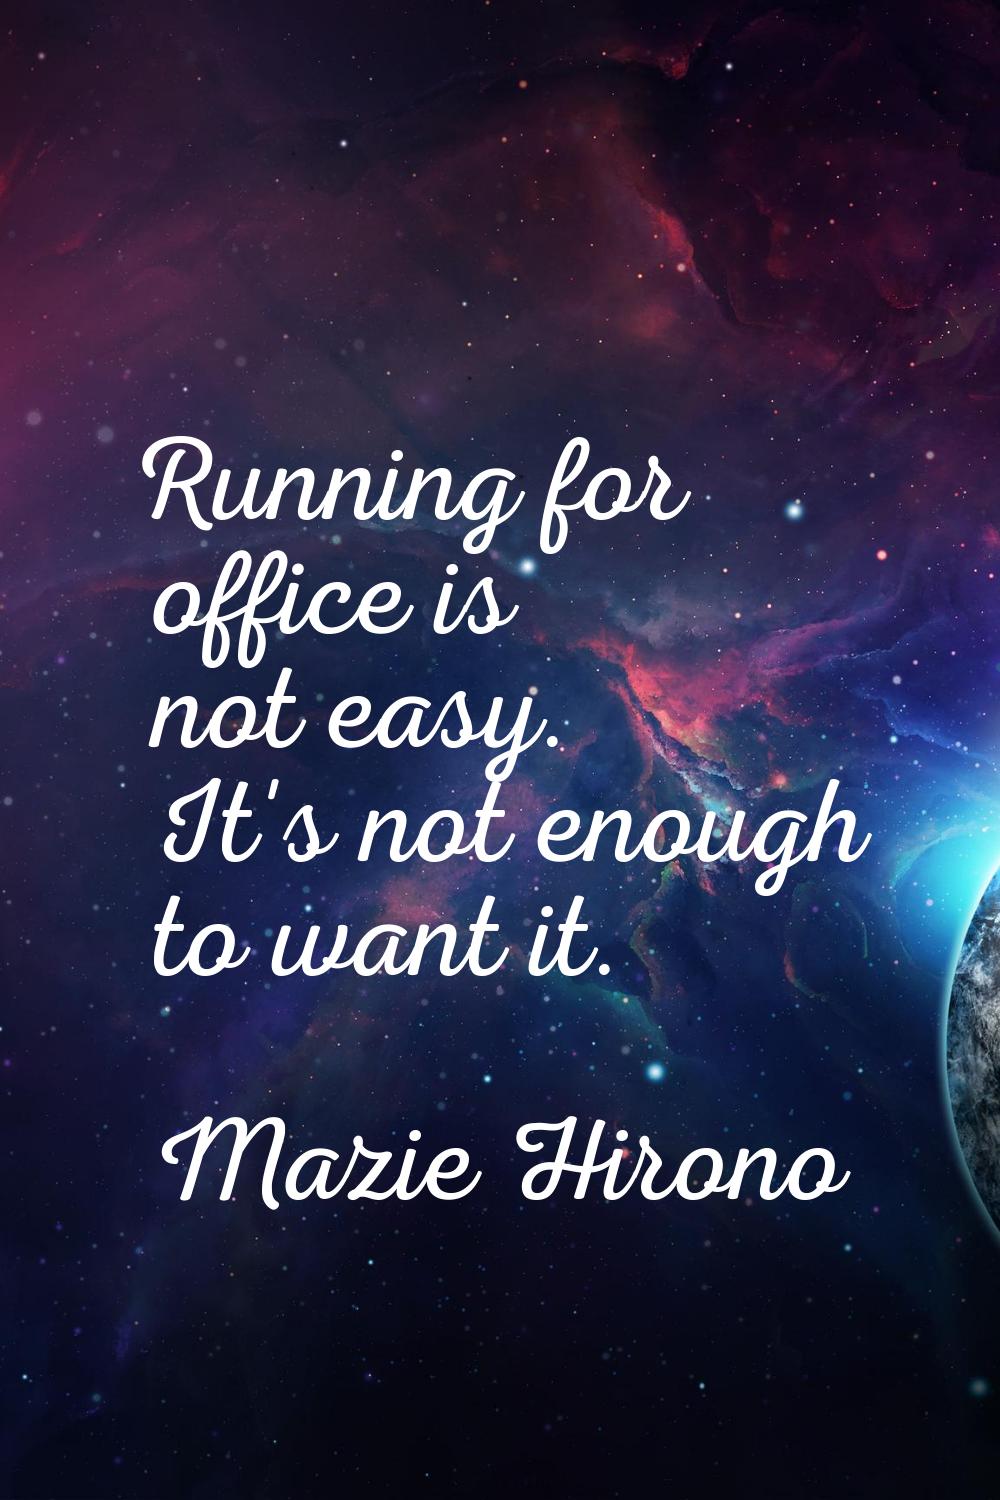 Running for office is not easy. It's not enough to want it.